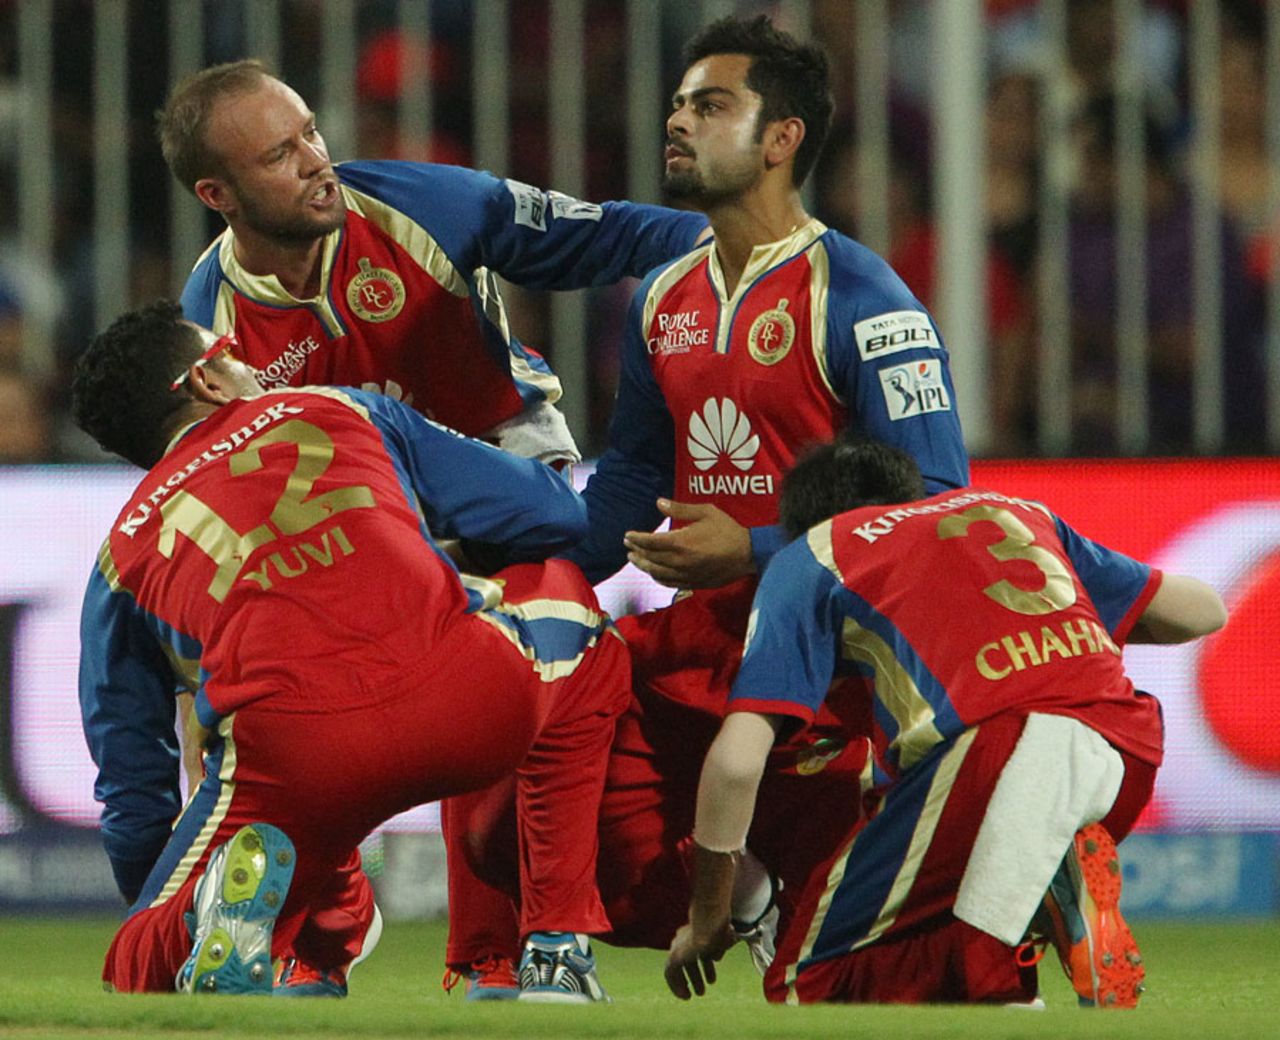 Virat Kohli was hit on the face by the ball while trying to stop it, Royal Challengers Bangalore v Kolkata Knight Riders, IPL 2014, Sharjah, April 24, 2014